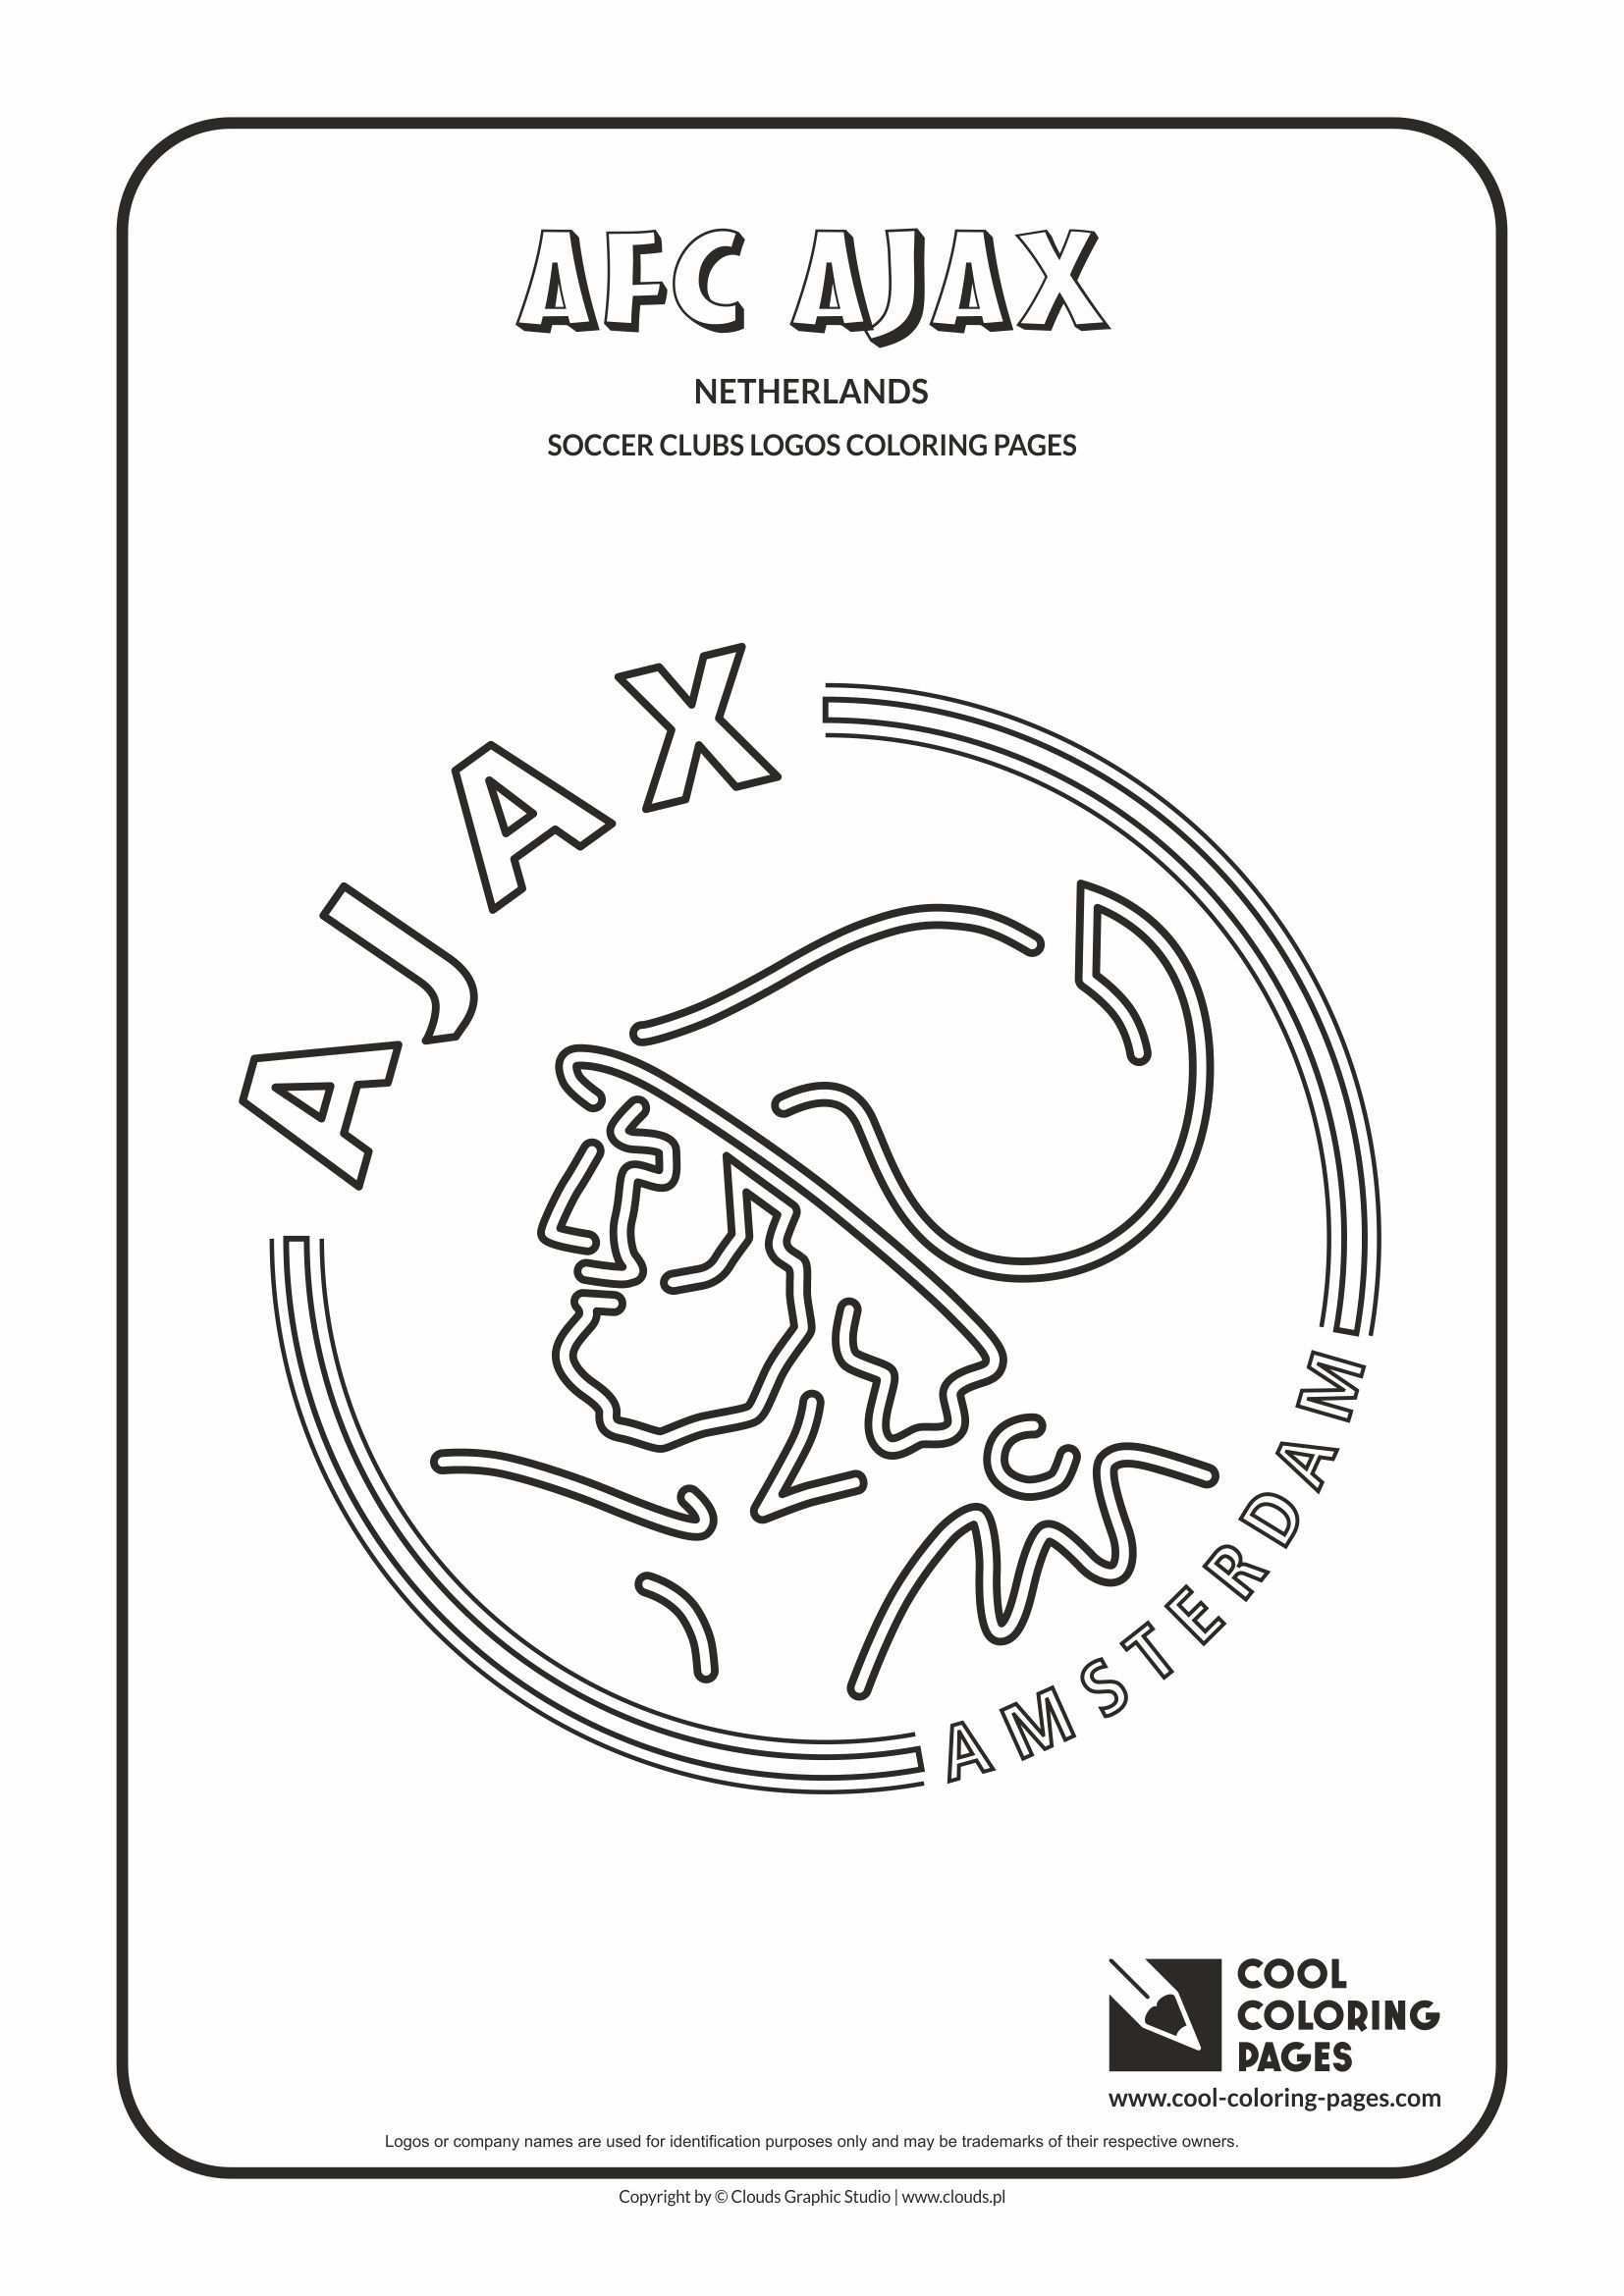 Afc Ajax Amsterdam Logo Coloring Page Cool Coloring Pages Coloring Pages Logos